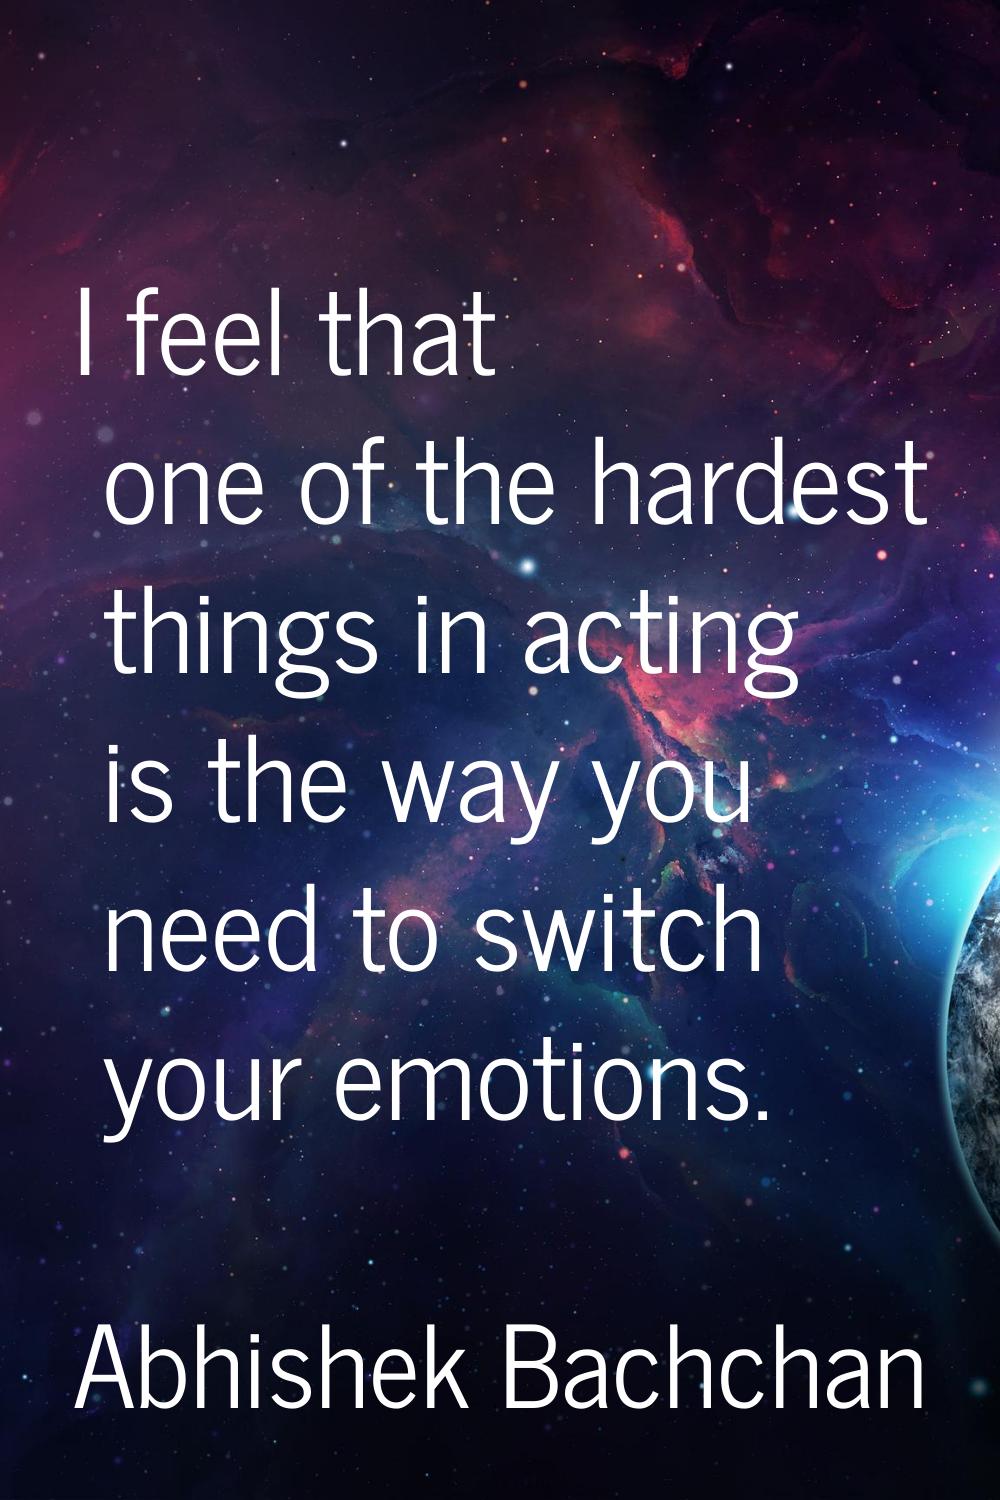 I feel that one of the hardest things in acting is the way you need to switch your emotions.